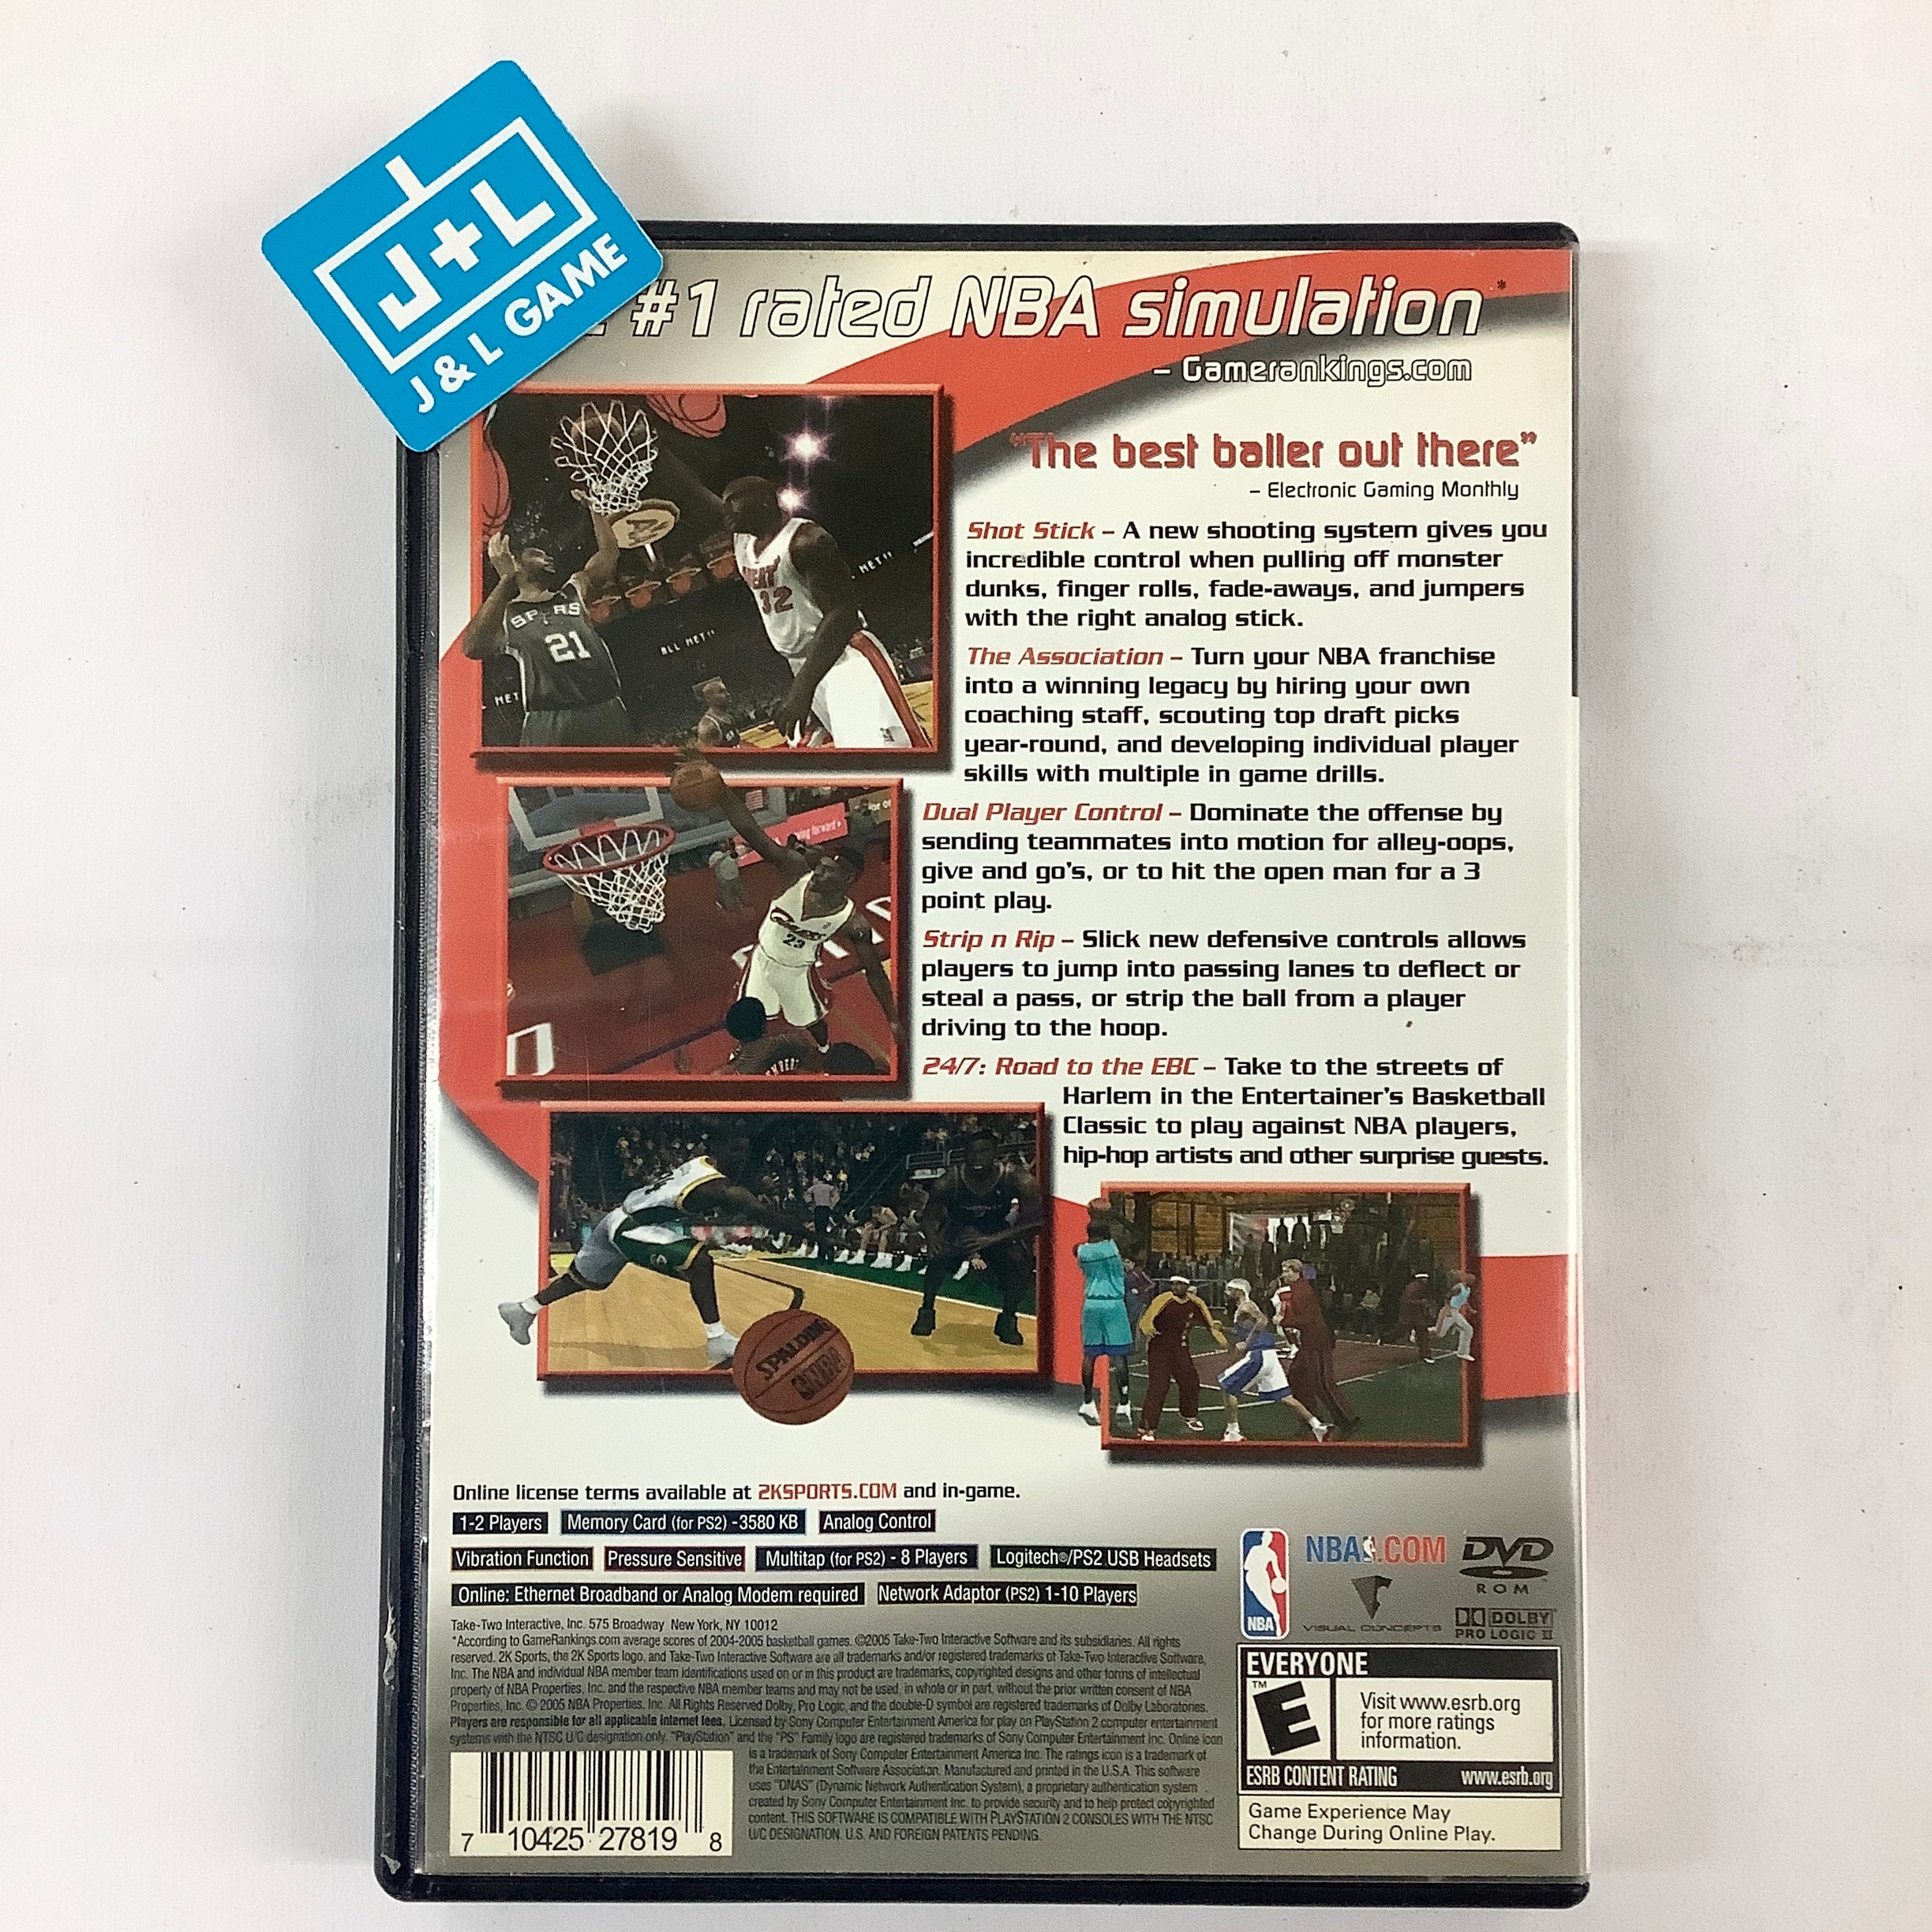 NBA 2K6 - (PS2) PlayStation 2 [Pre-Owned] Video Games 2K Sports   